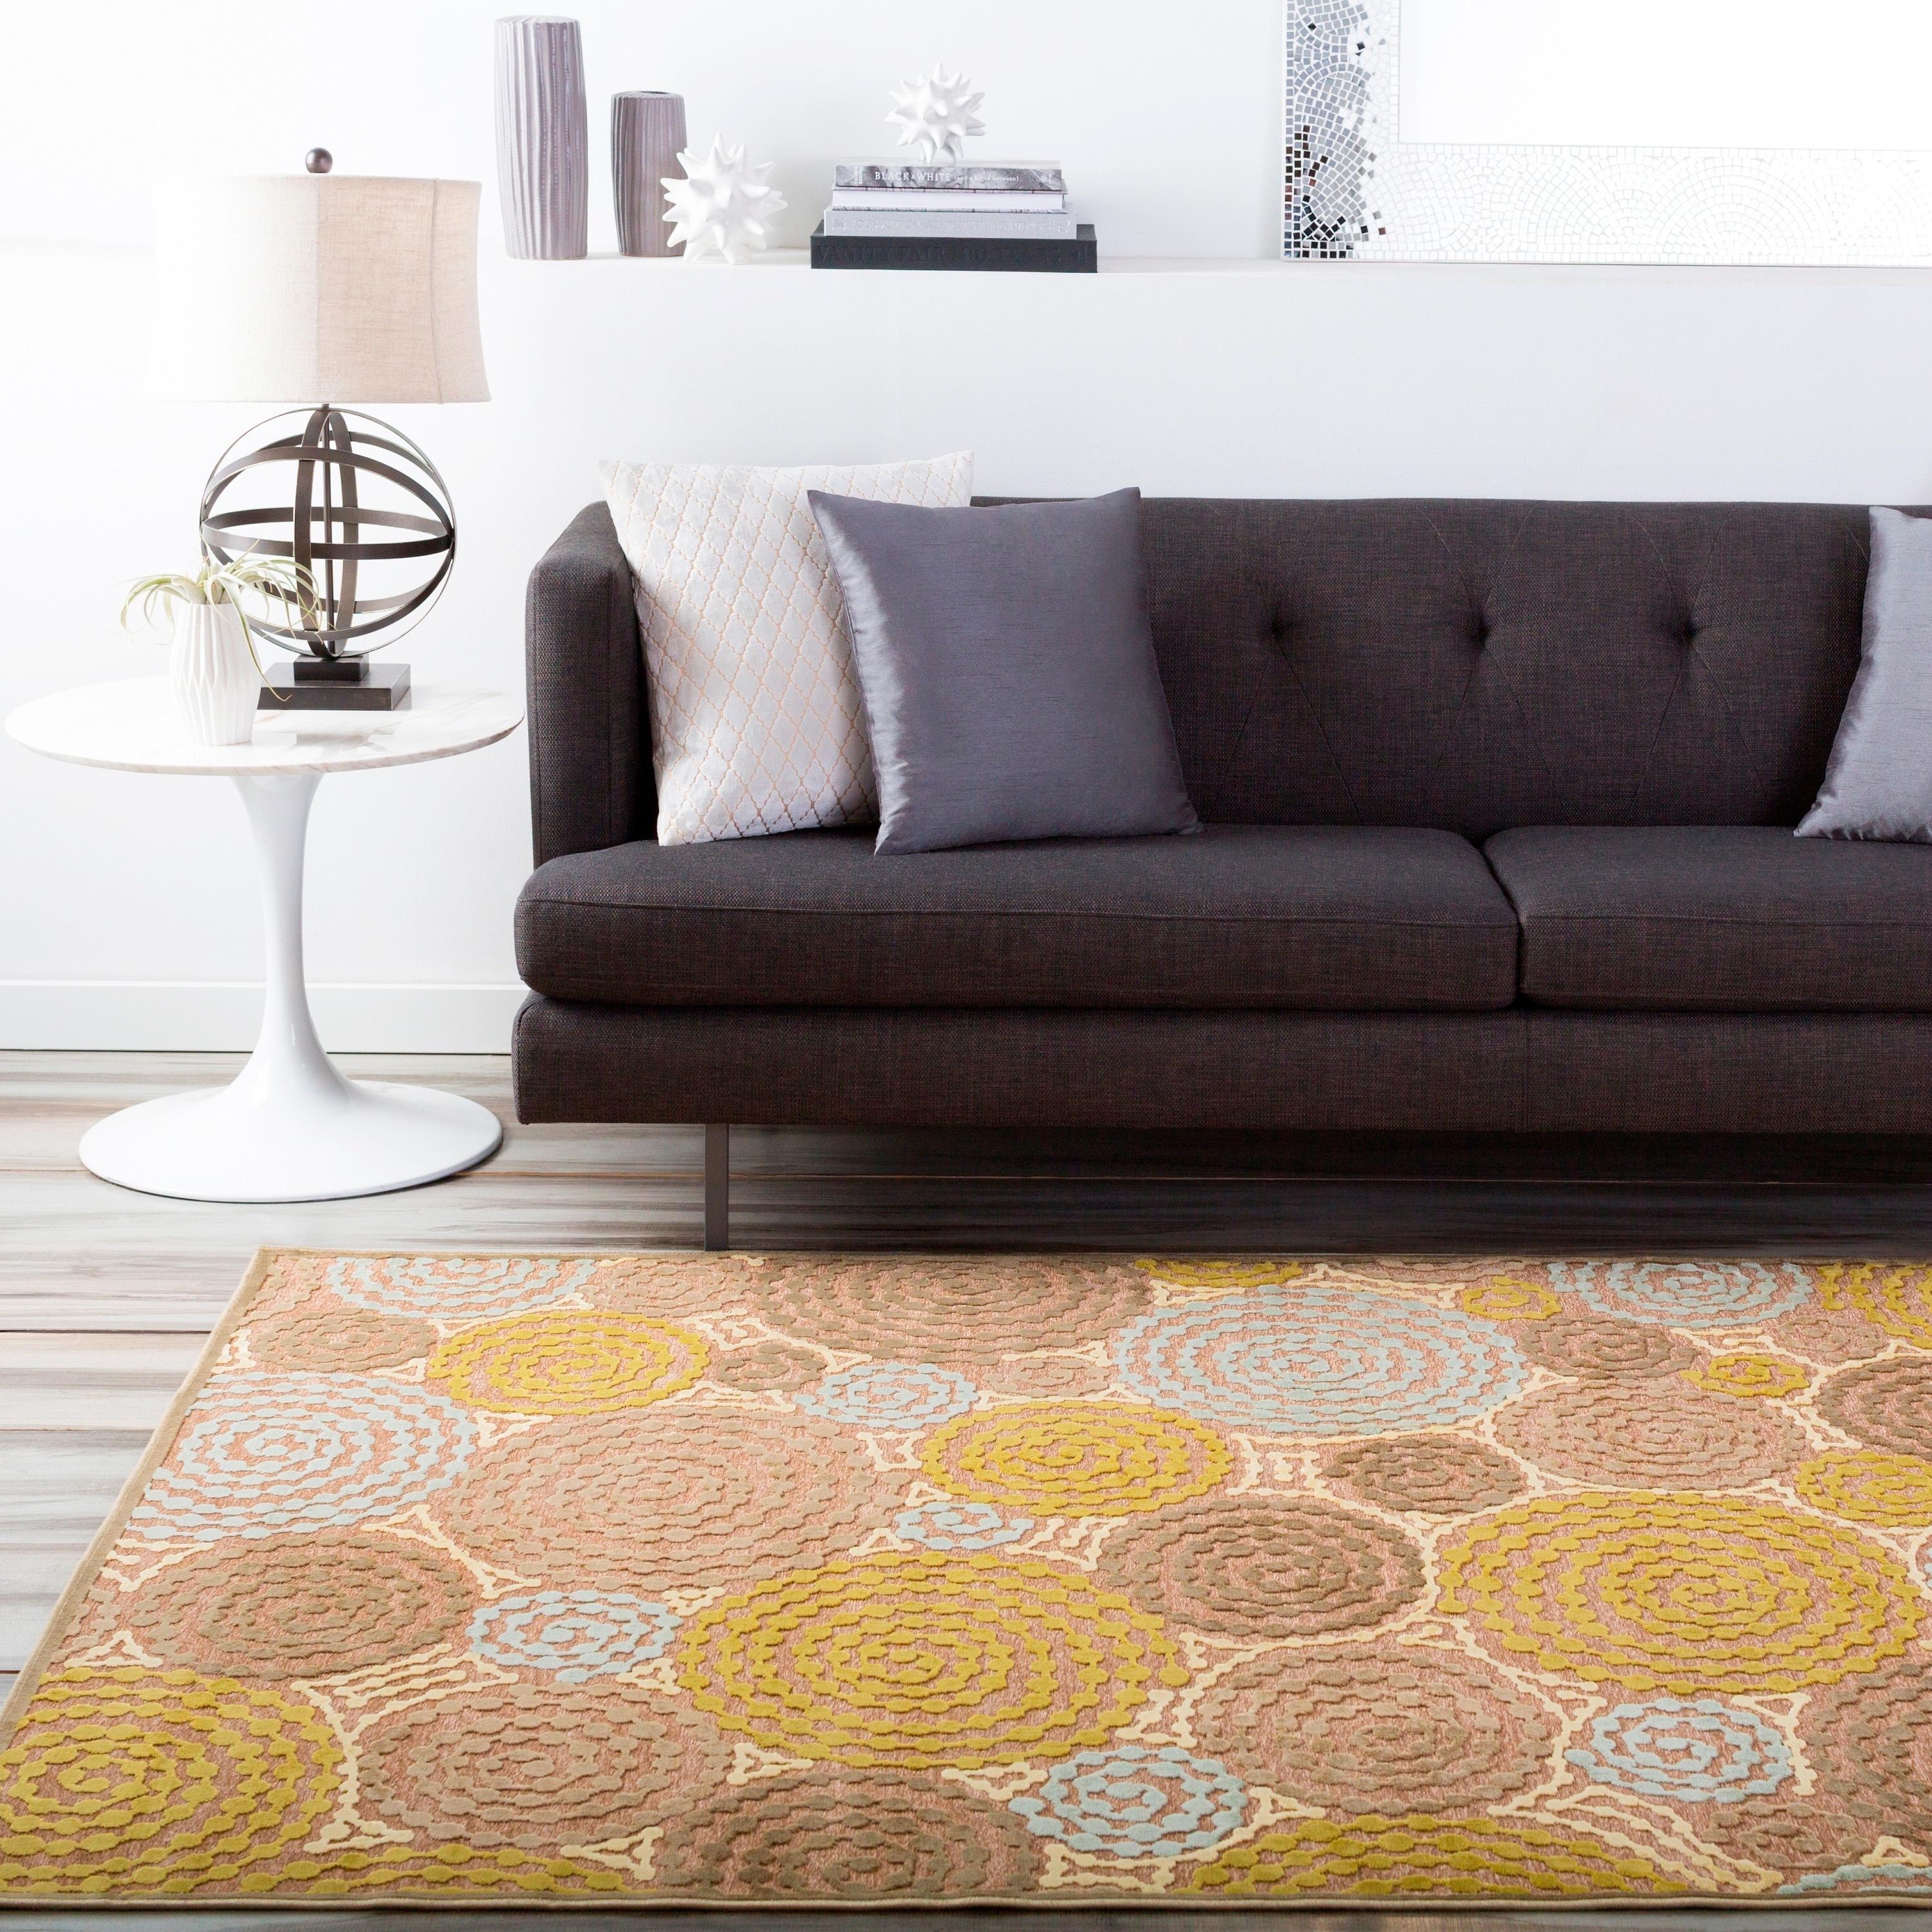 Meticulously Woven Circles Geometric Abstract Rug (76 x 106)